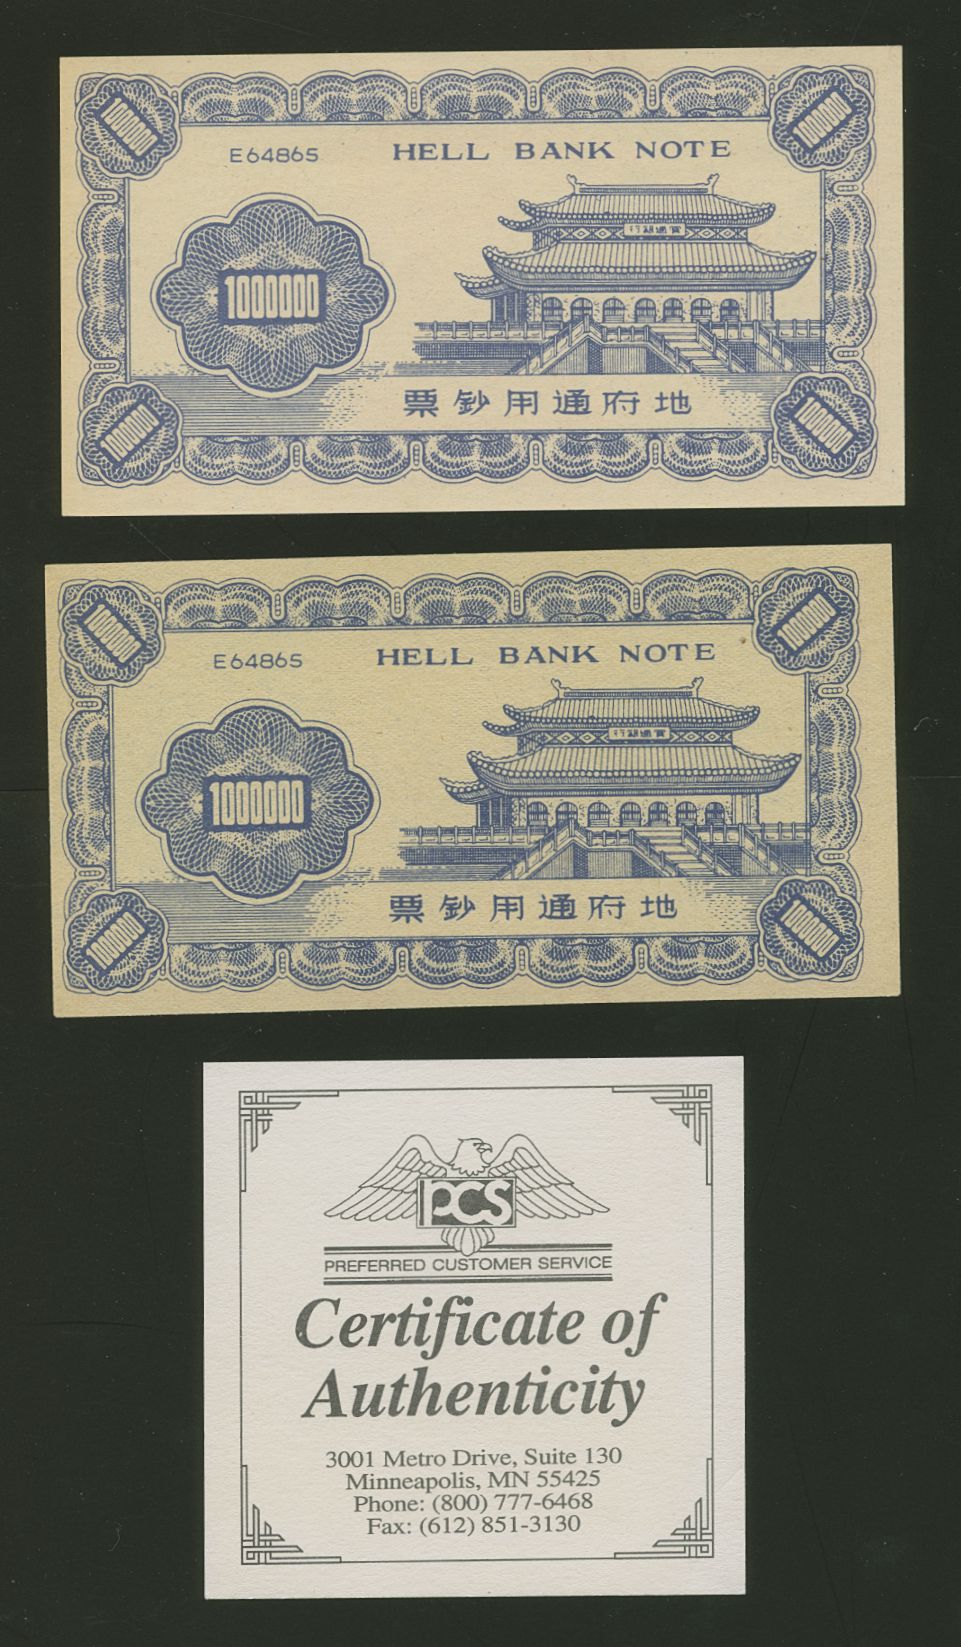 Chinese Hall Notes and card to explain (2 images of front and reverse)